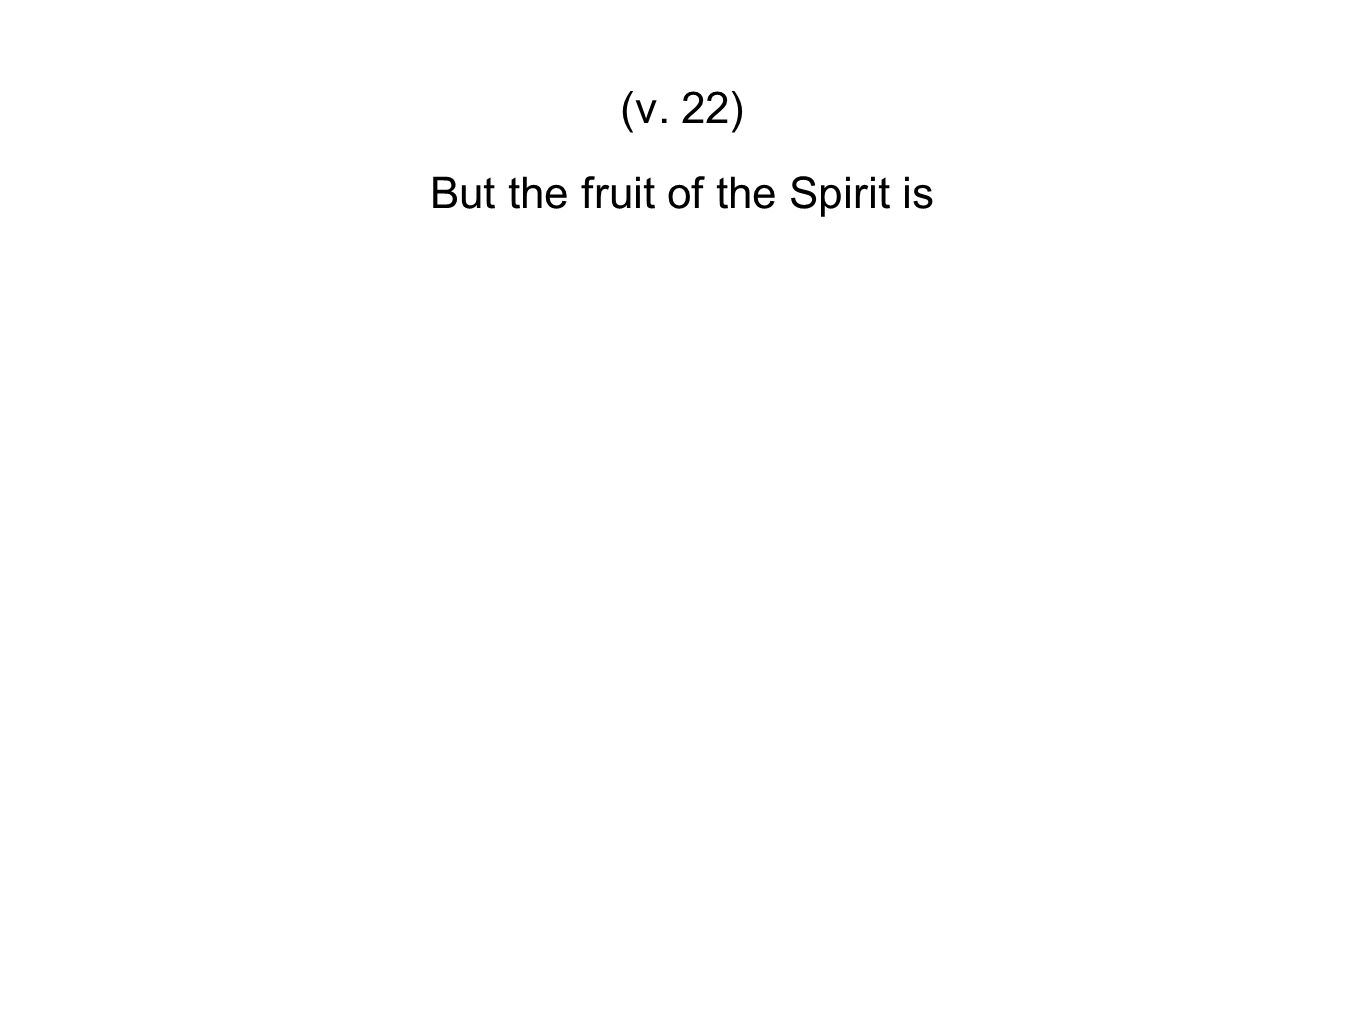 But the fruit of the Spirit is